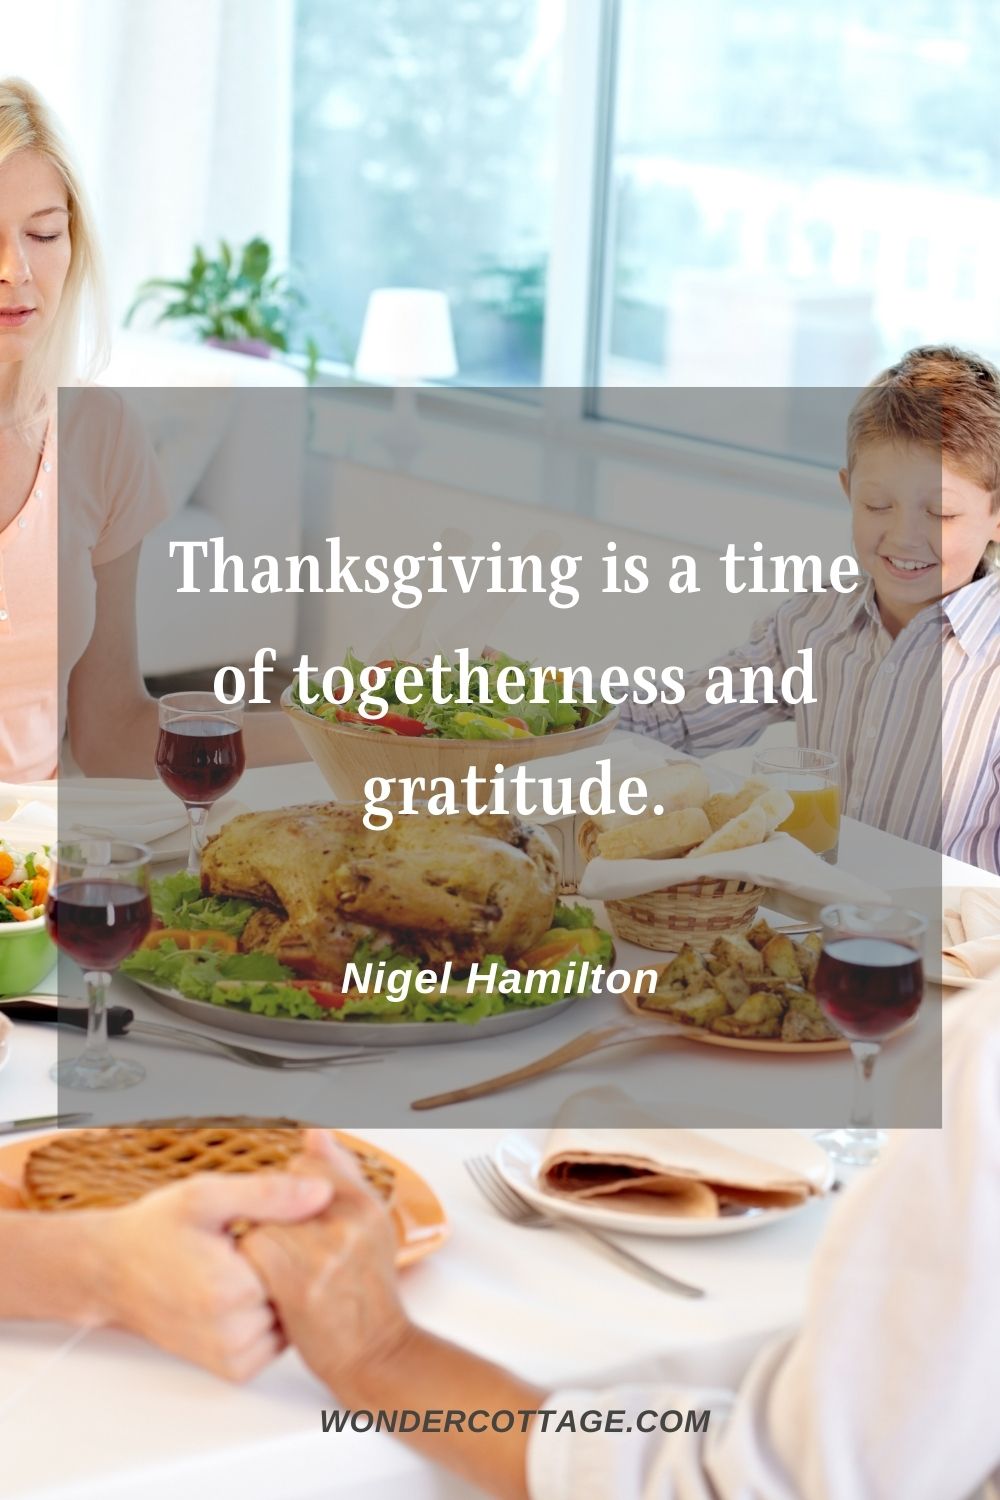 Thanksgiving is a time of togetherness and gratitude. Nigel Hamilton